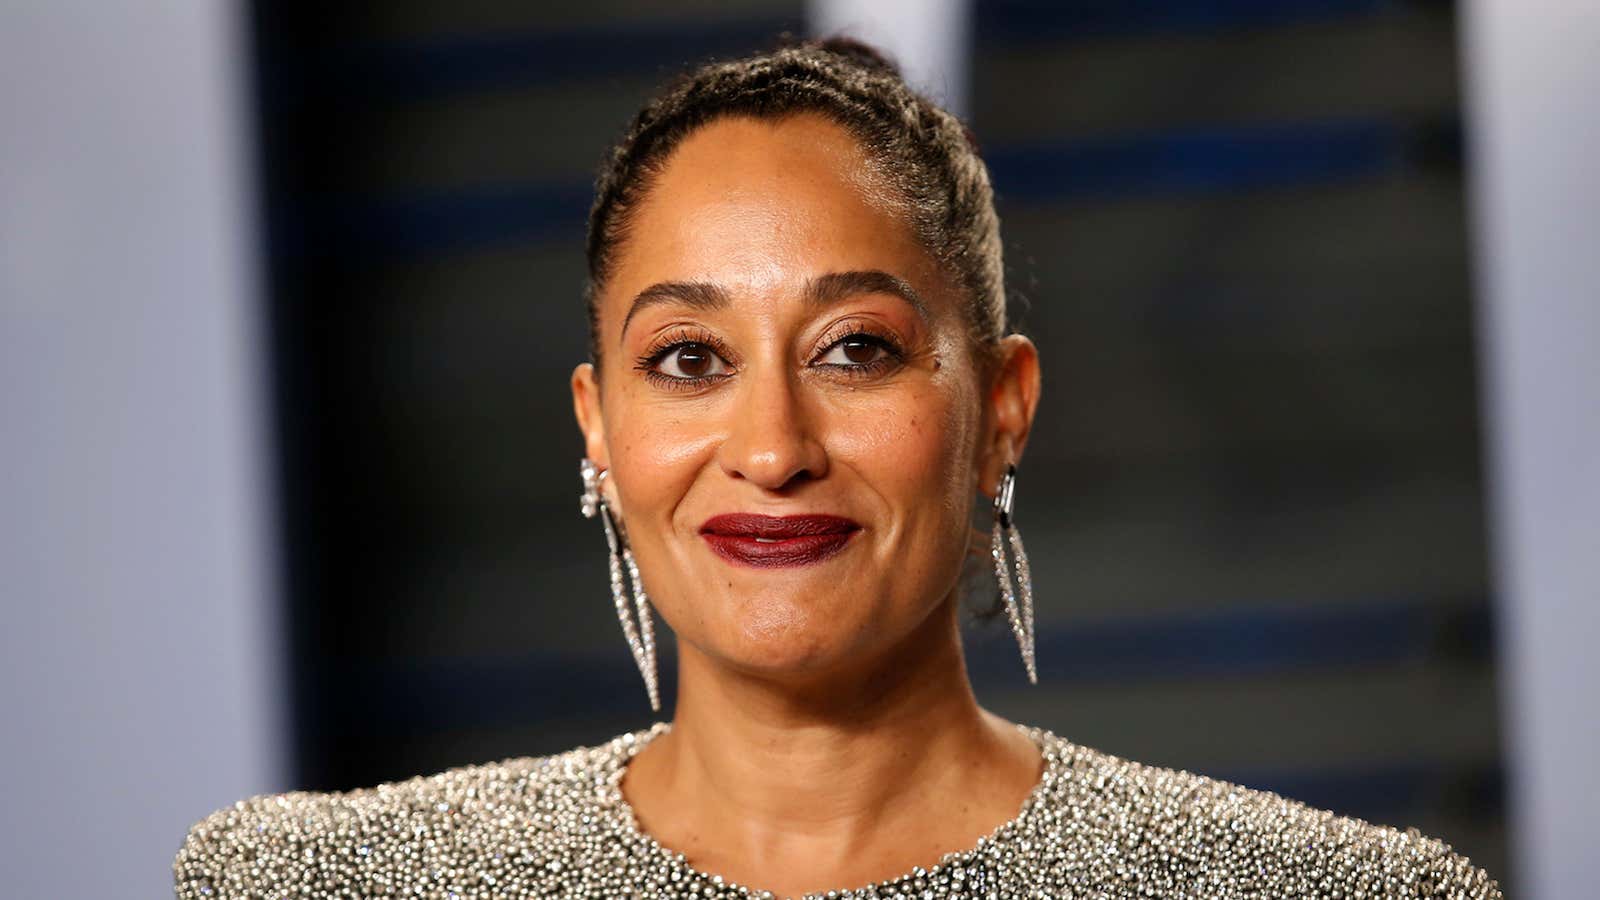 Tracee Ellis Ross says the upcoming animated series “Jodie” will be a “smart, funny workplace comedy full of commentary about everything from gentrification to sex to tech to call-out culture.”